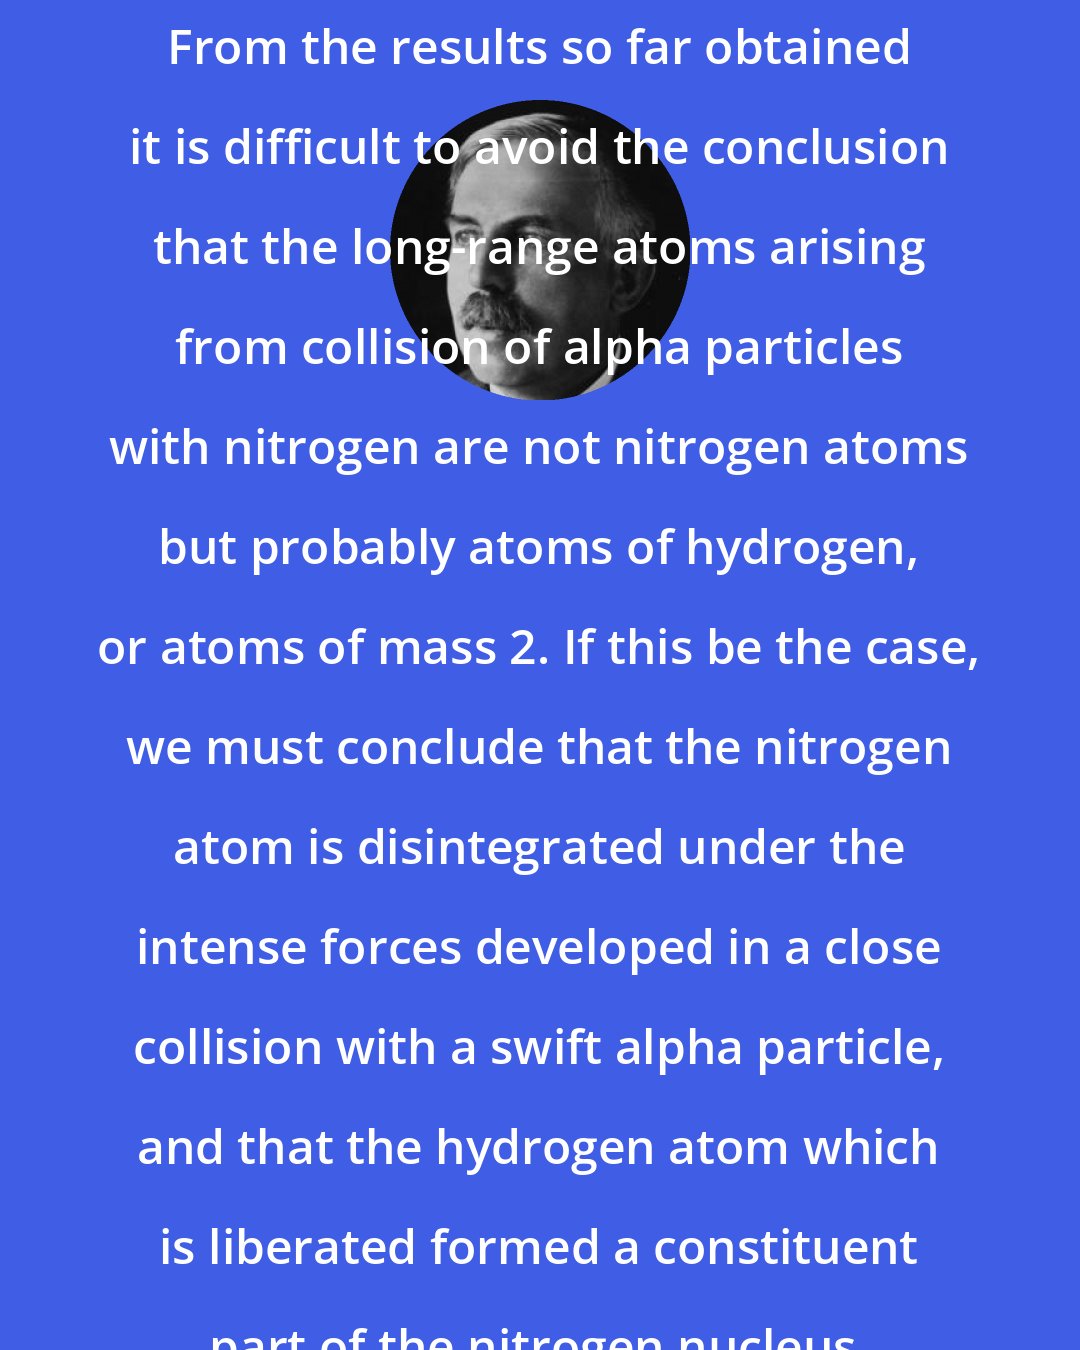 Ernest Rutherford: From the results so far obtained it is difficult to avoid the conclusion that the long-range atoms arising from collision of alpha particles with nitrogen are not nitrogen atoms but probably atoms of hydrogen, or atoms of mass 2. If this be the case, we must conclude that the nitrogen atom is disintegrated under the intense forces developed in a close collision with a swift alpha particle, and that the hydrogen atom which is liberated formed a constituent part of the nitrogen nucleus.